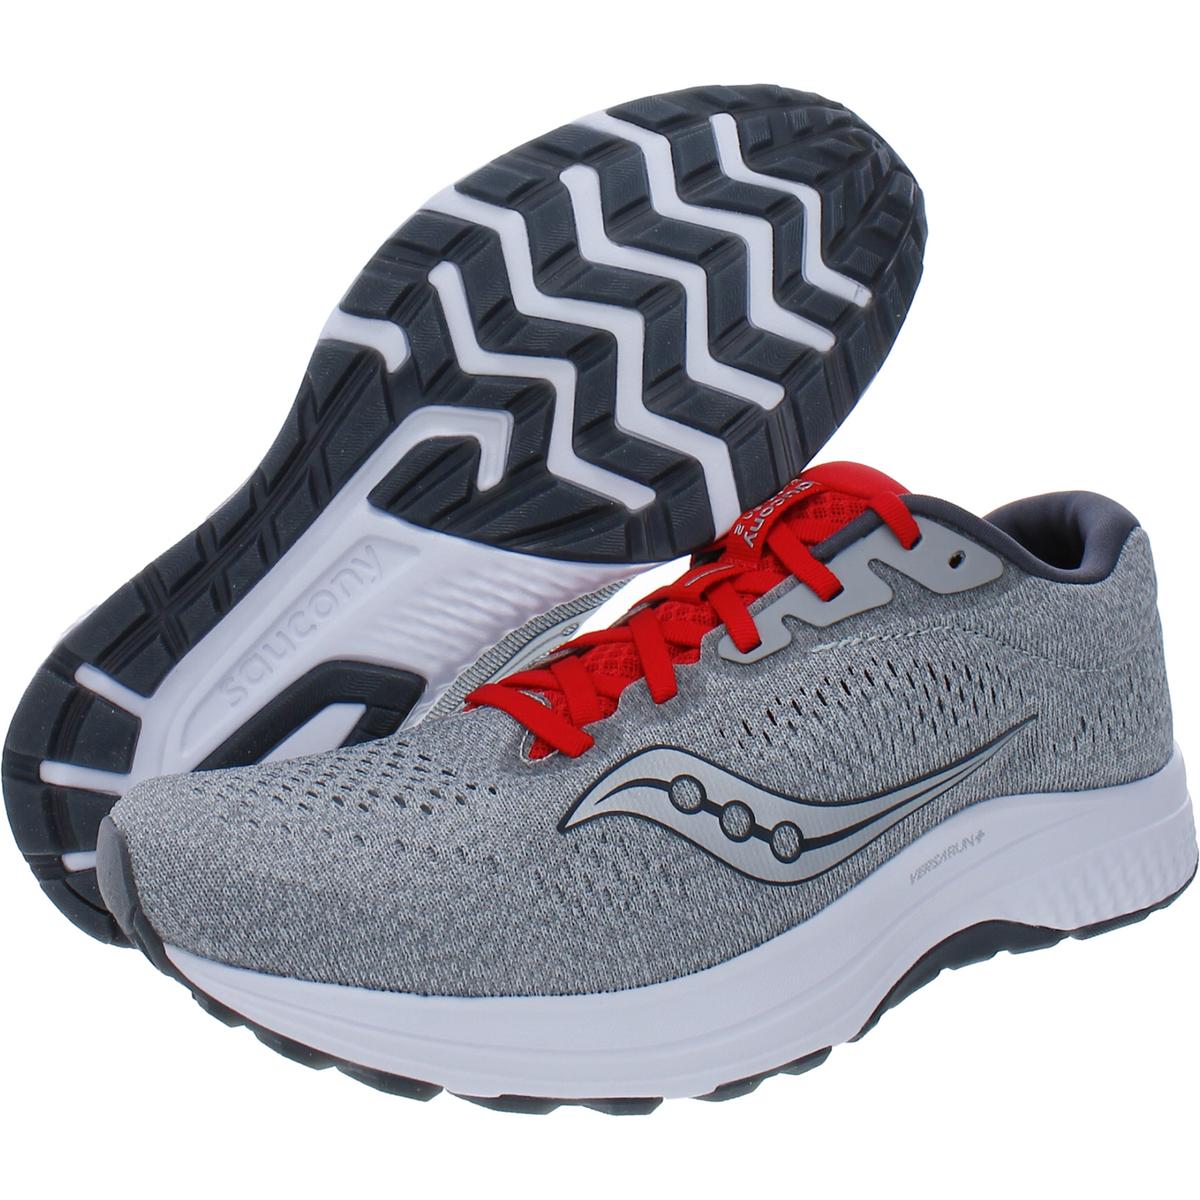 Saucony Clarion 2 Mens Fitness Gym Running Shoes